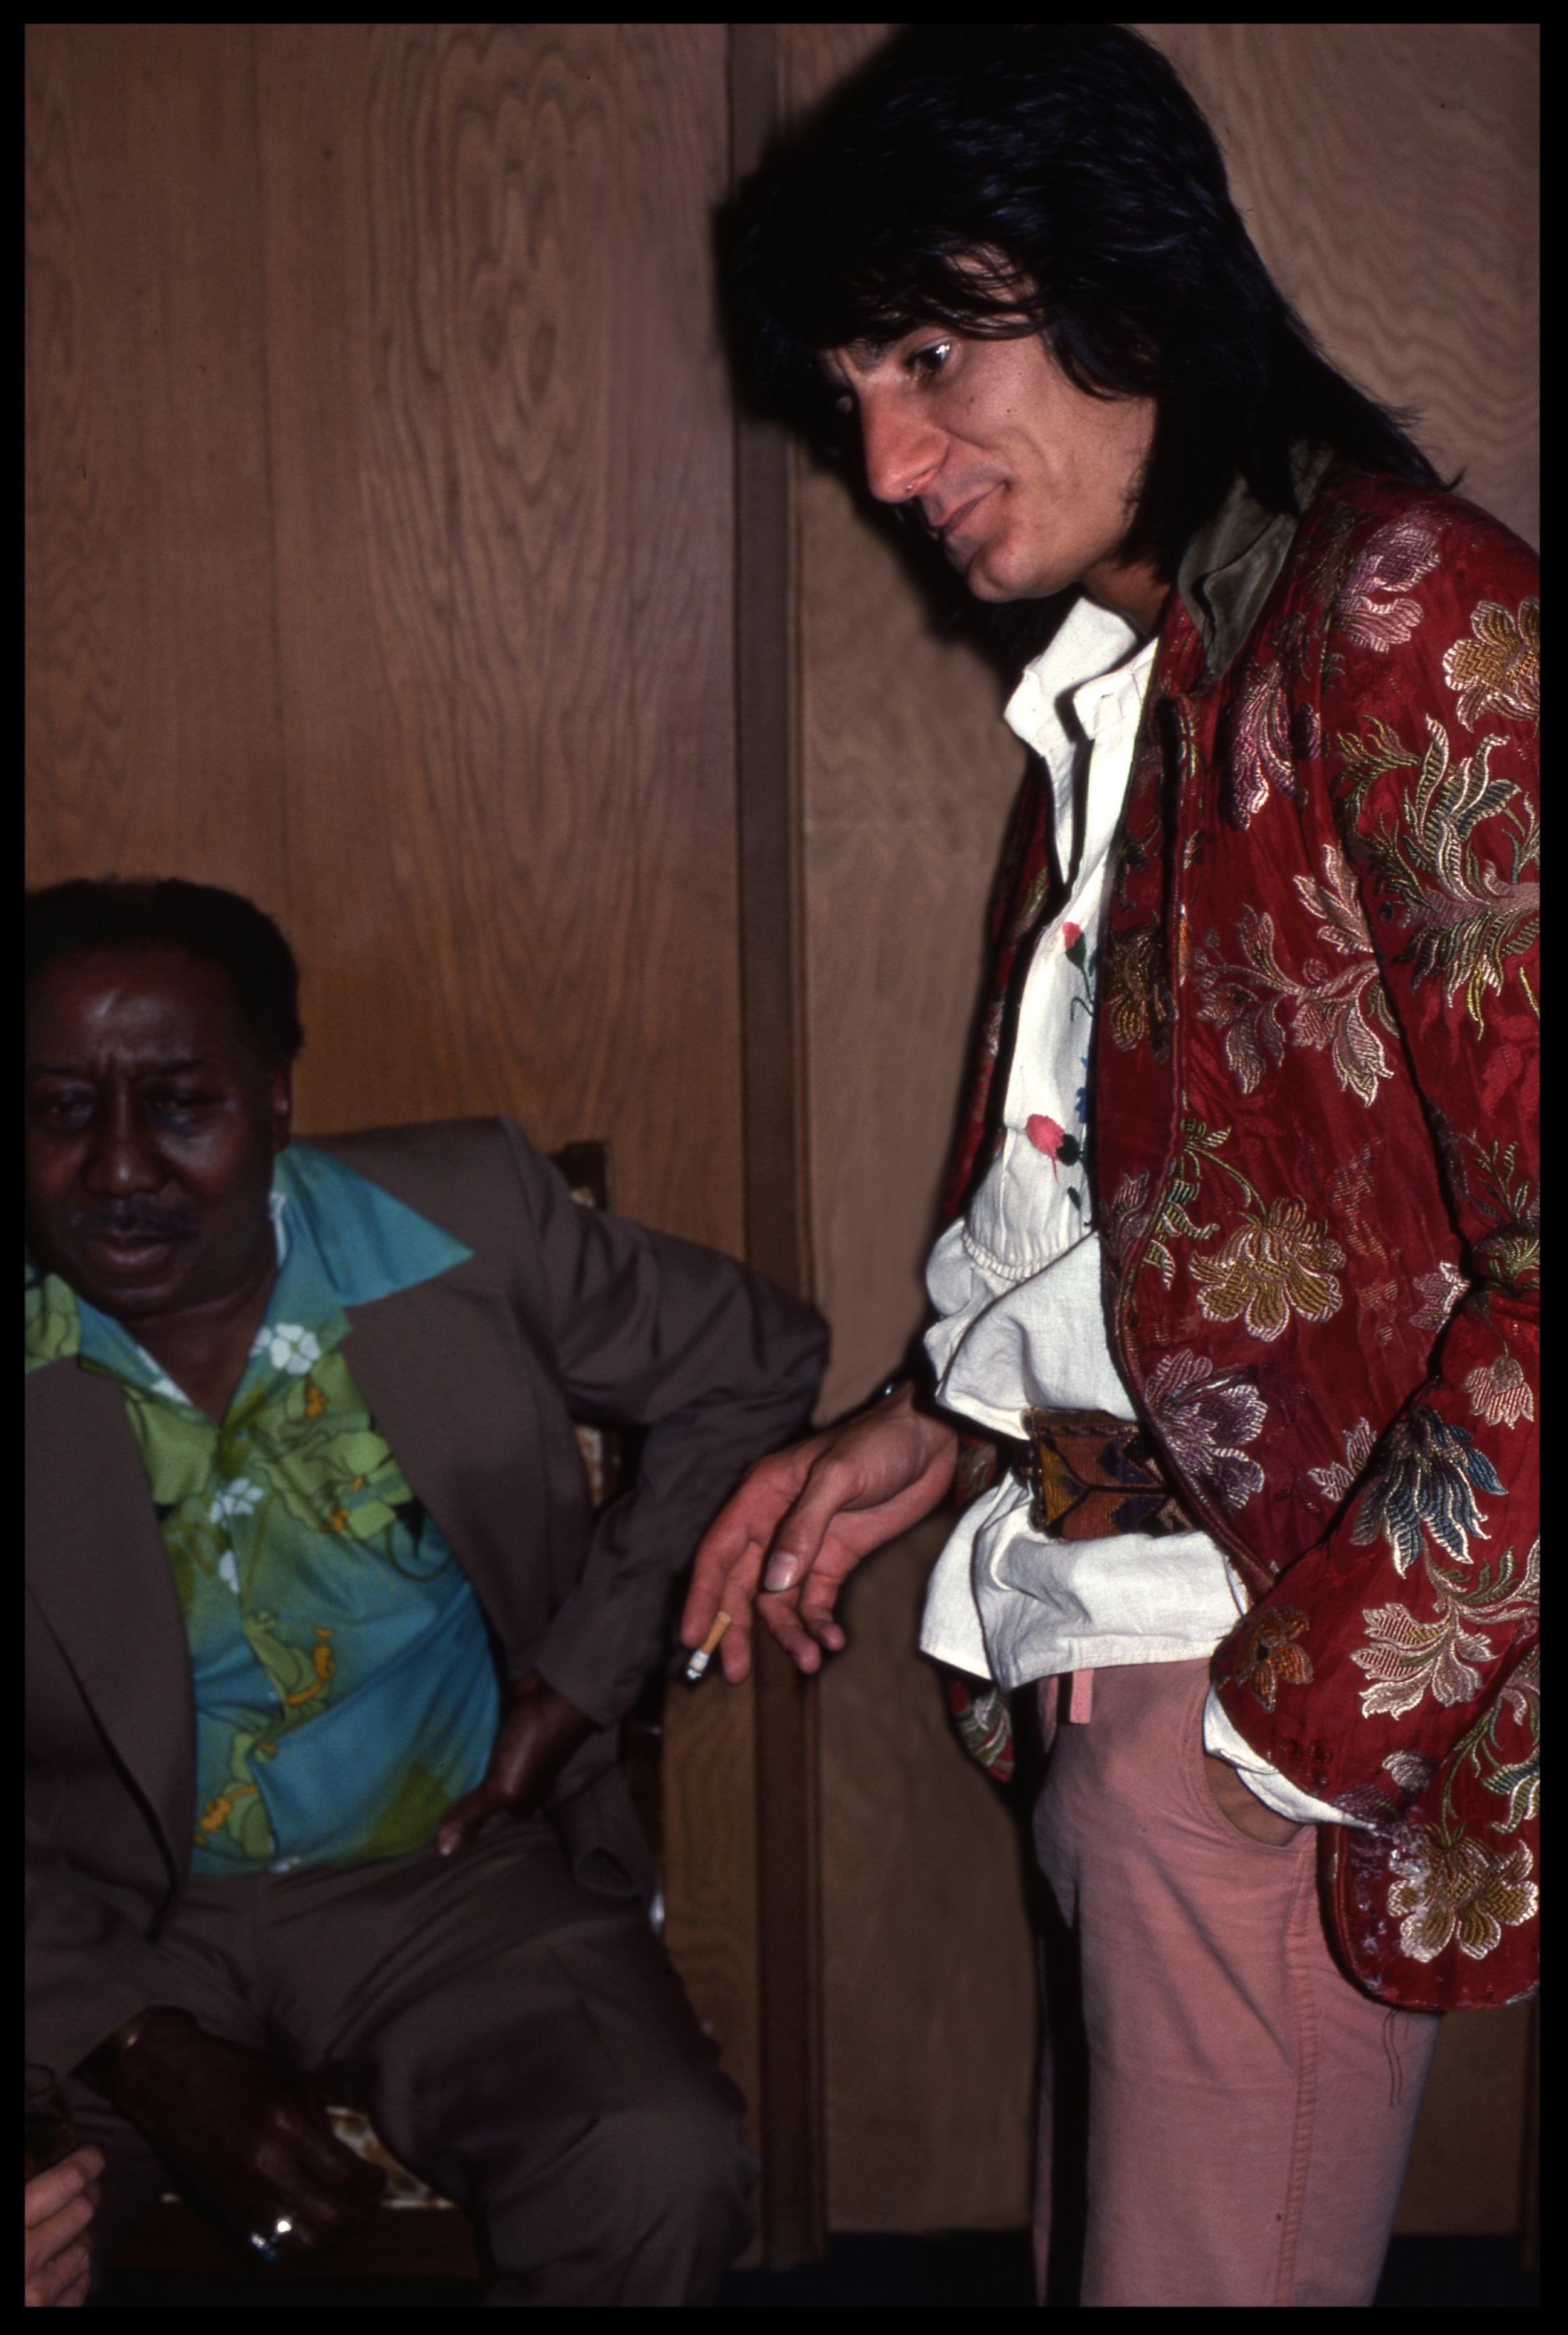 Muddy Waters and Ronnie Wood of the Rolling Stones c.1975 from original 35mm transparency #muddywaters #ronniewood #rollingstones #fenderguitar #gibsonguitar #rockandrollphoto #fineartphoto #fineart 